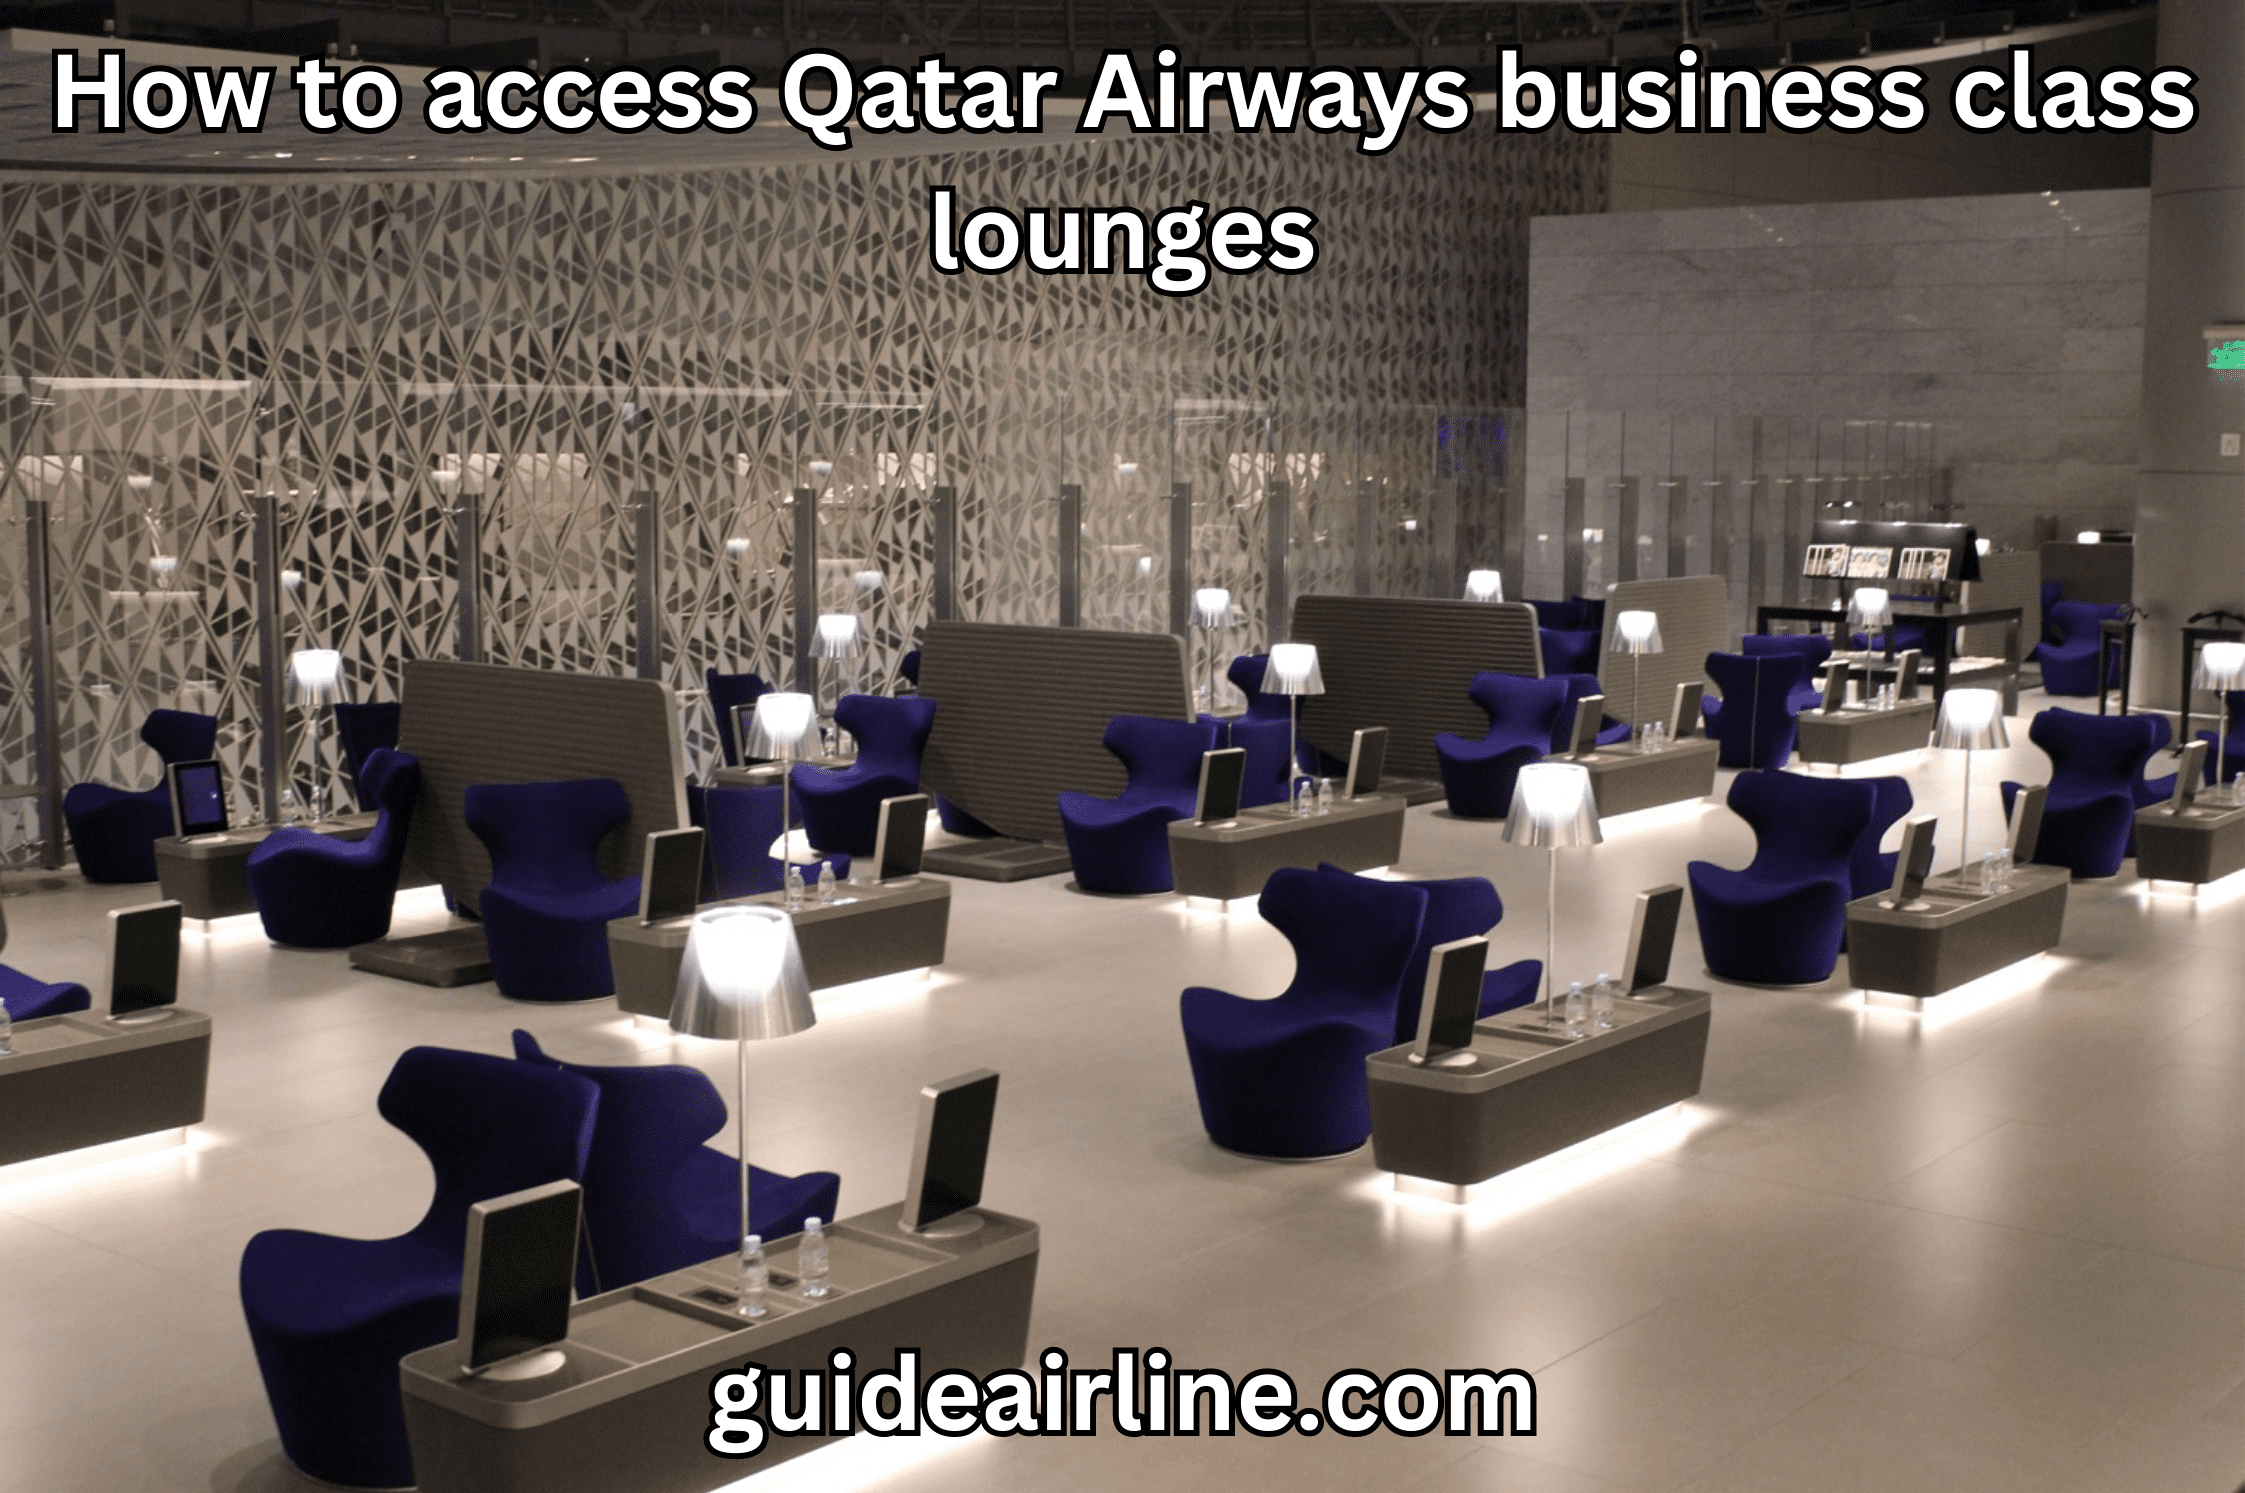 How to access Qatar Airways business class lounges